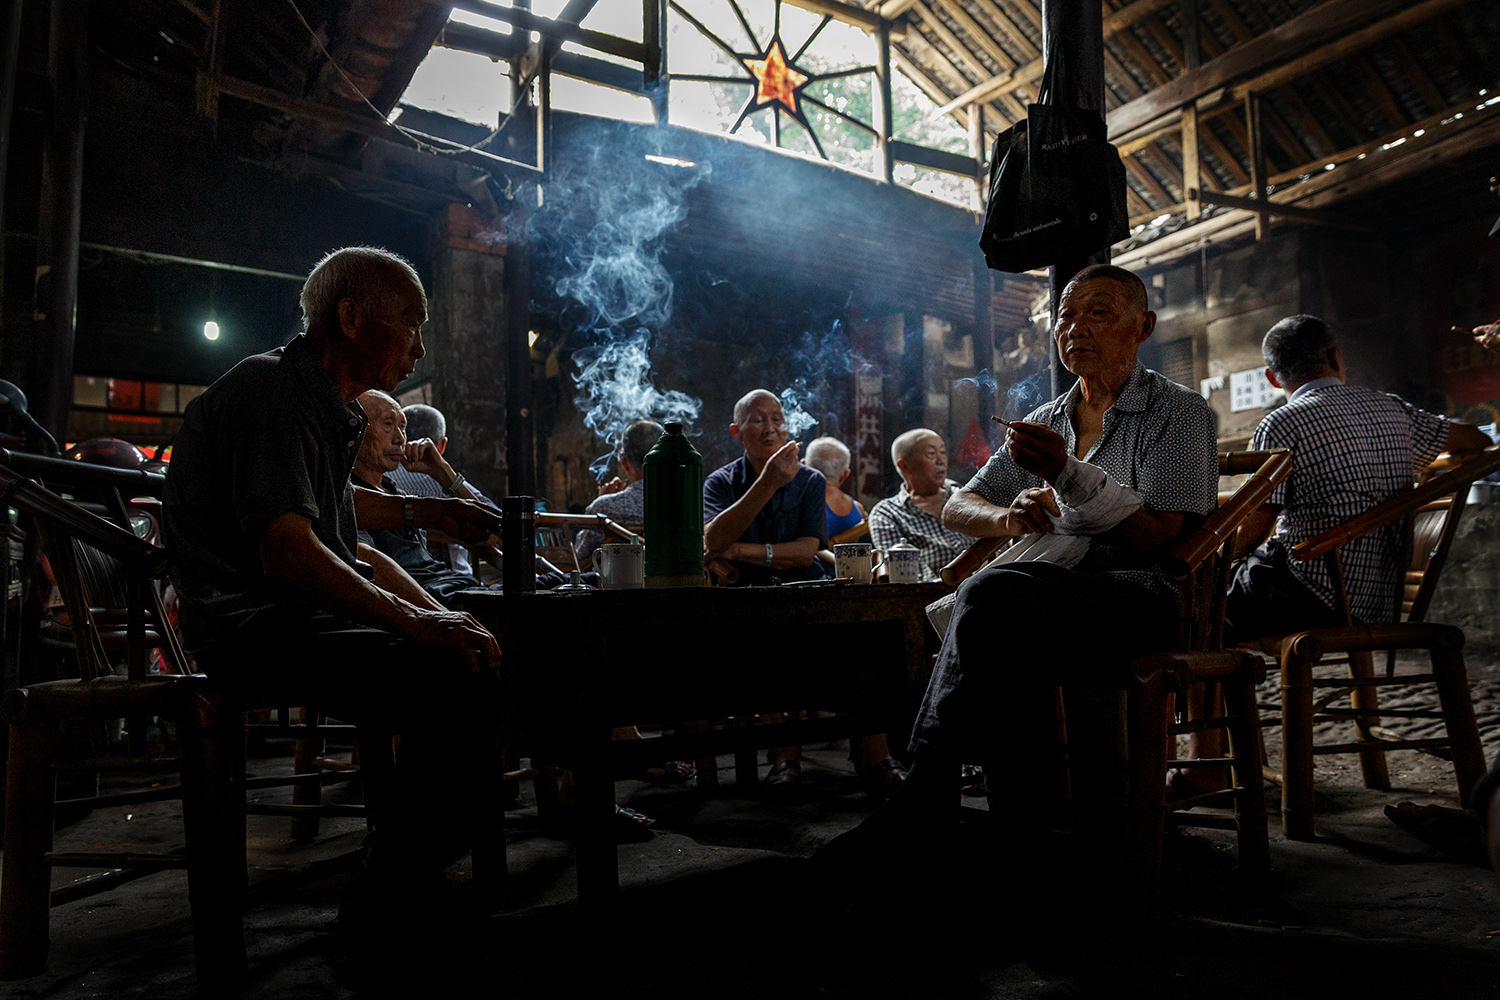 Chingdu tea houses abundant functions: for relaxing, meetings, recreation, as well as being the court of civilians.